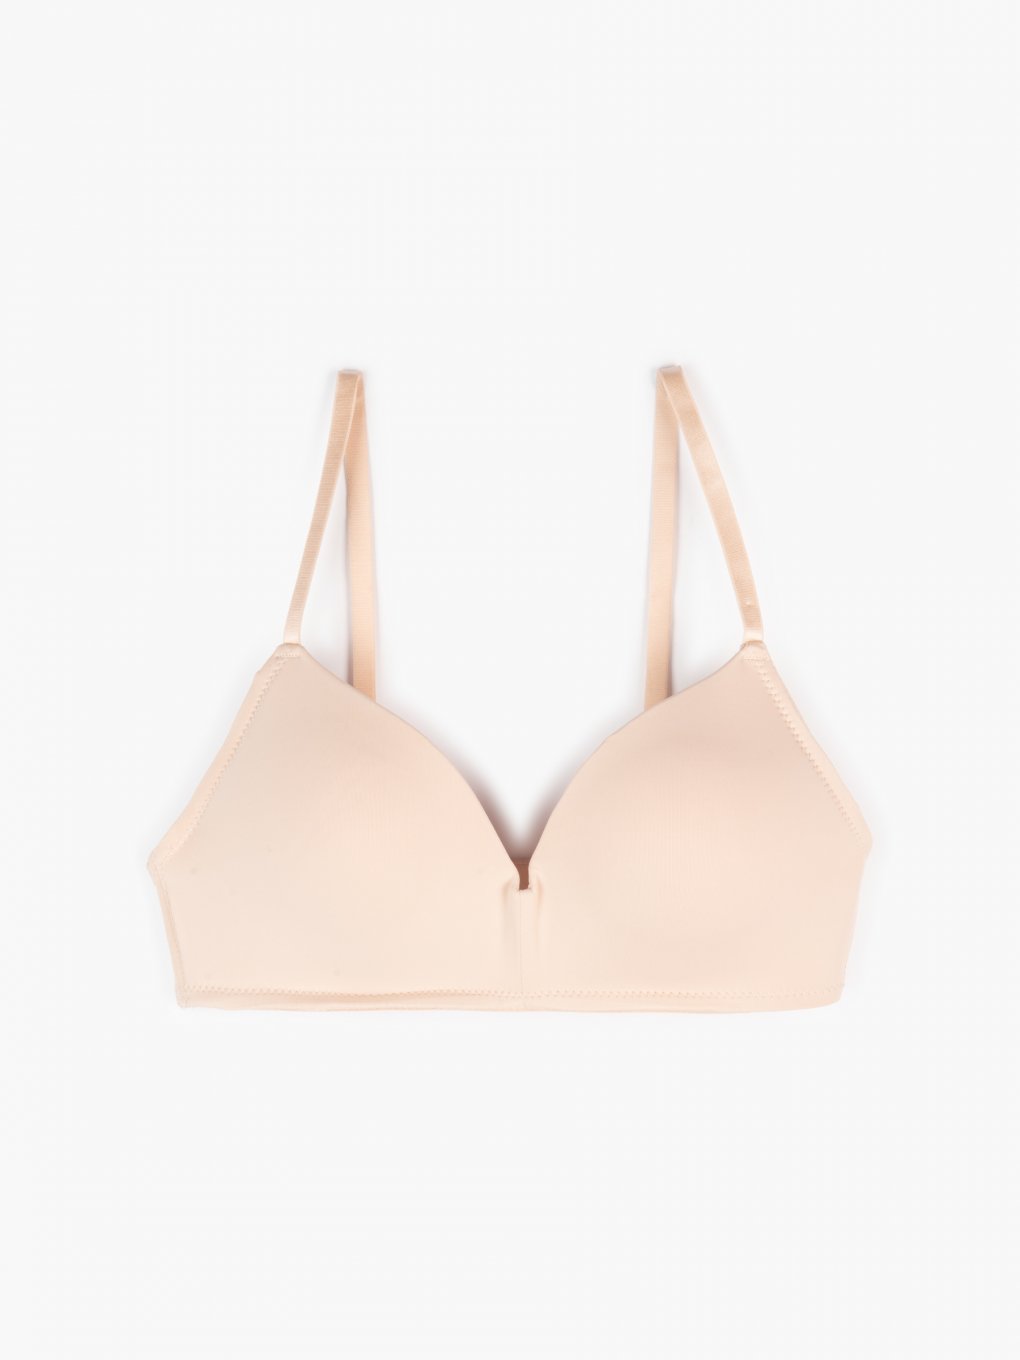 Non-wired padded bra